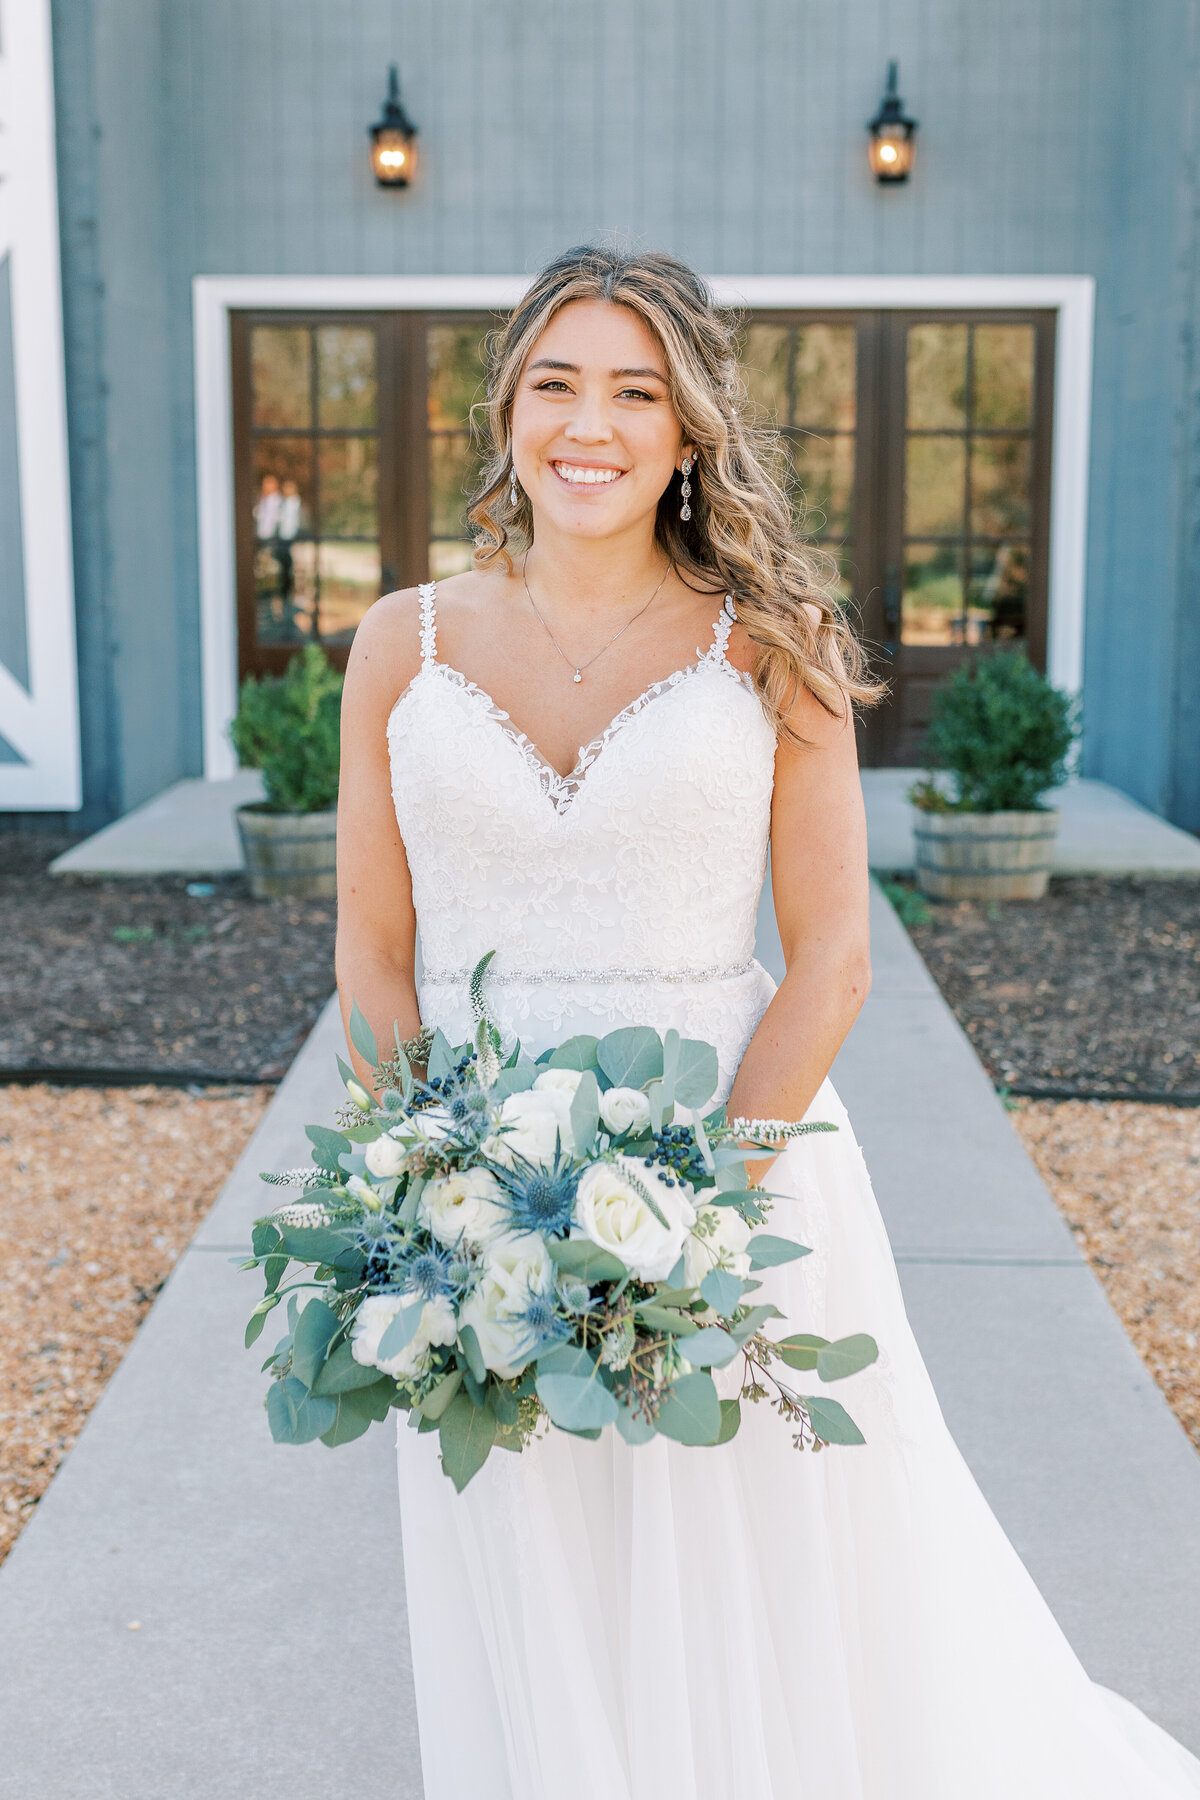 Fall wedding in athens, ga bringing on location hair and makeup